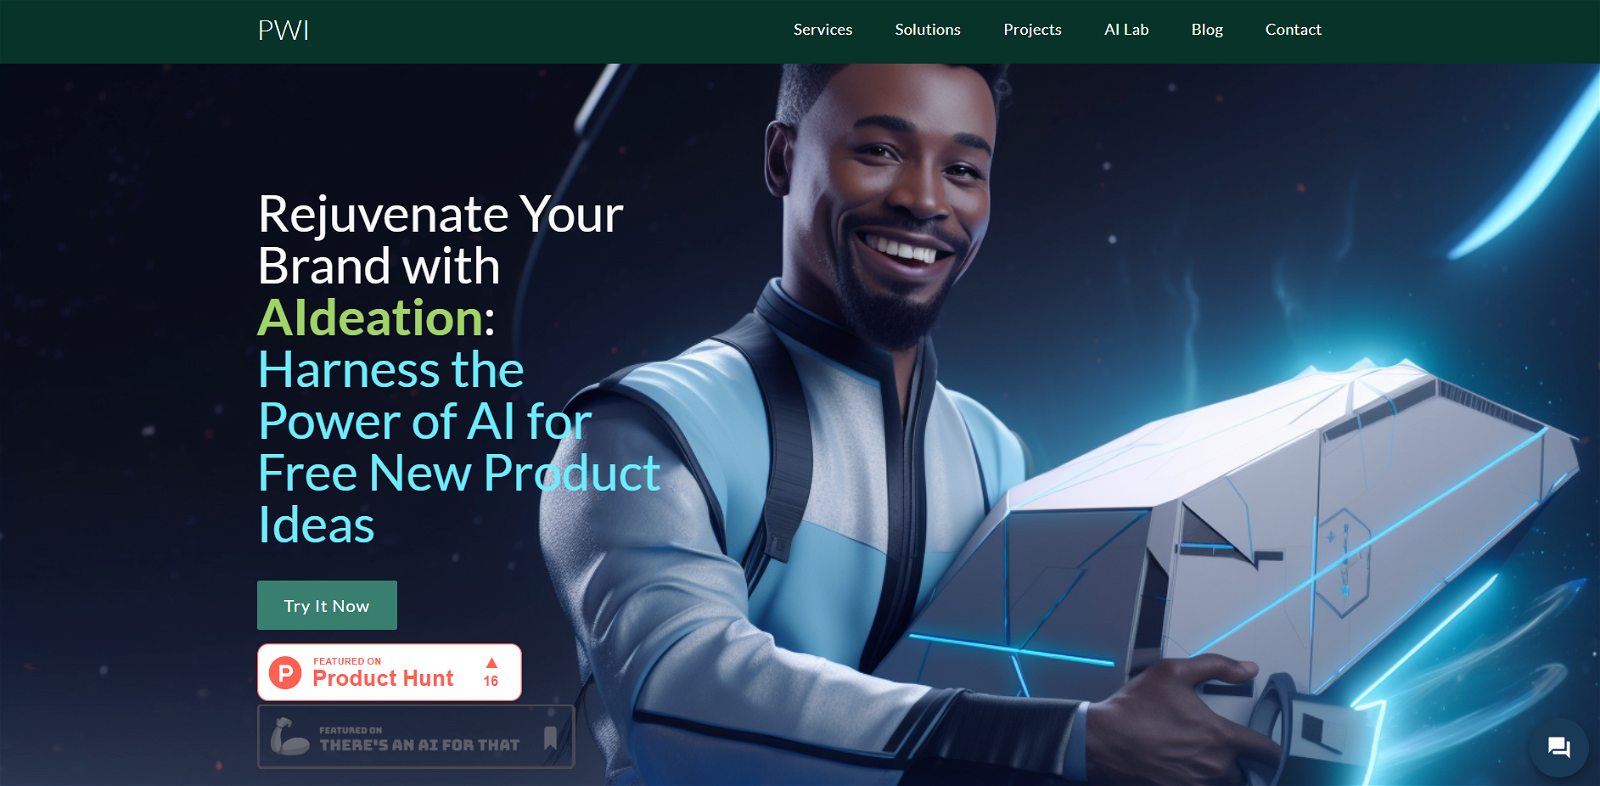 Product Ideas Service by PWI website